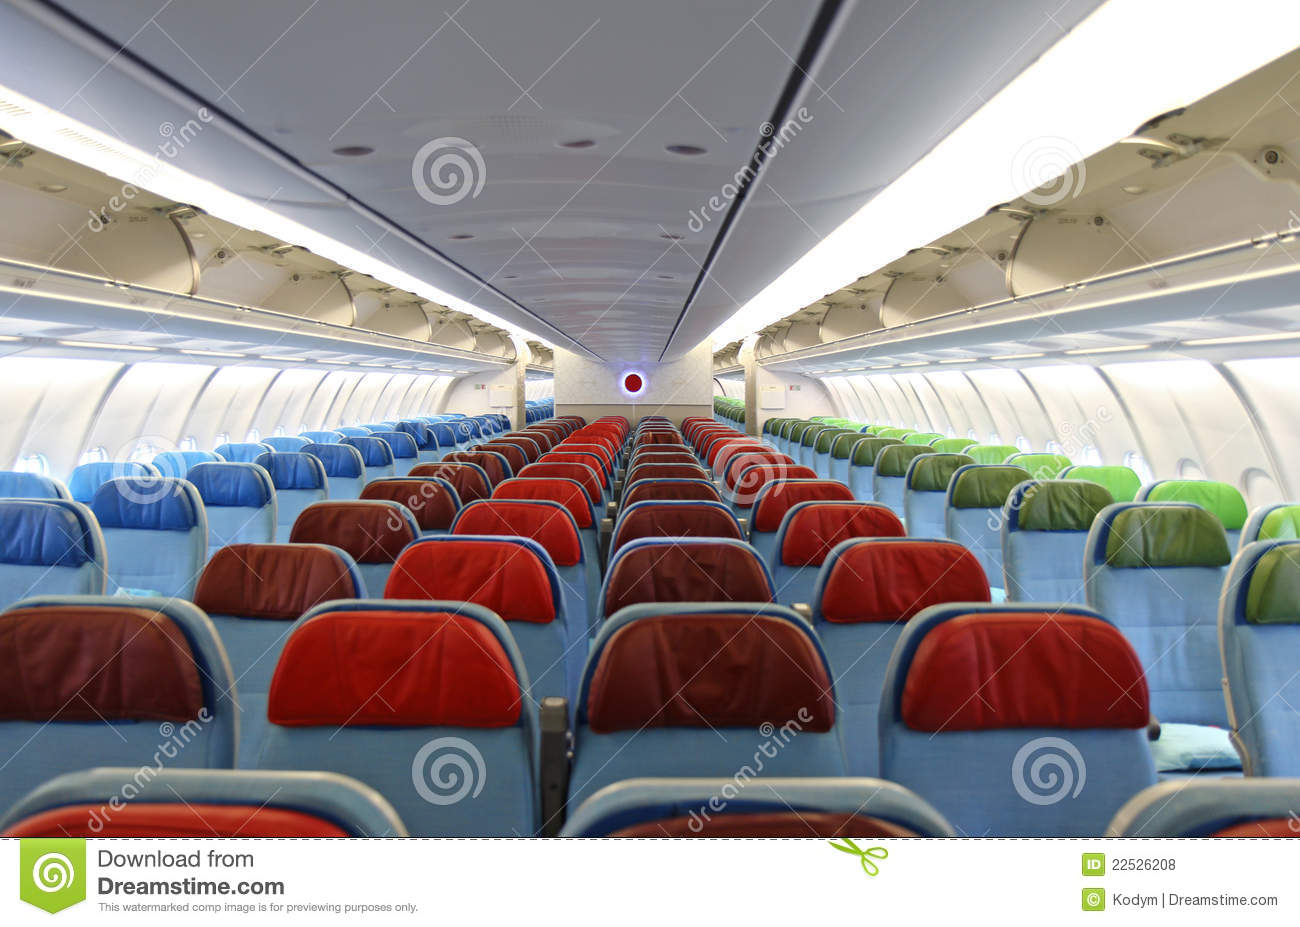 Airplane Interior With The Seats Royalty Free Stock Photos   Image